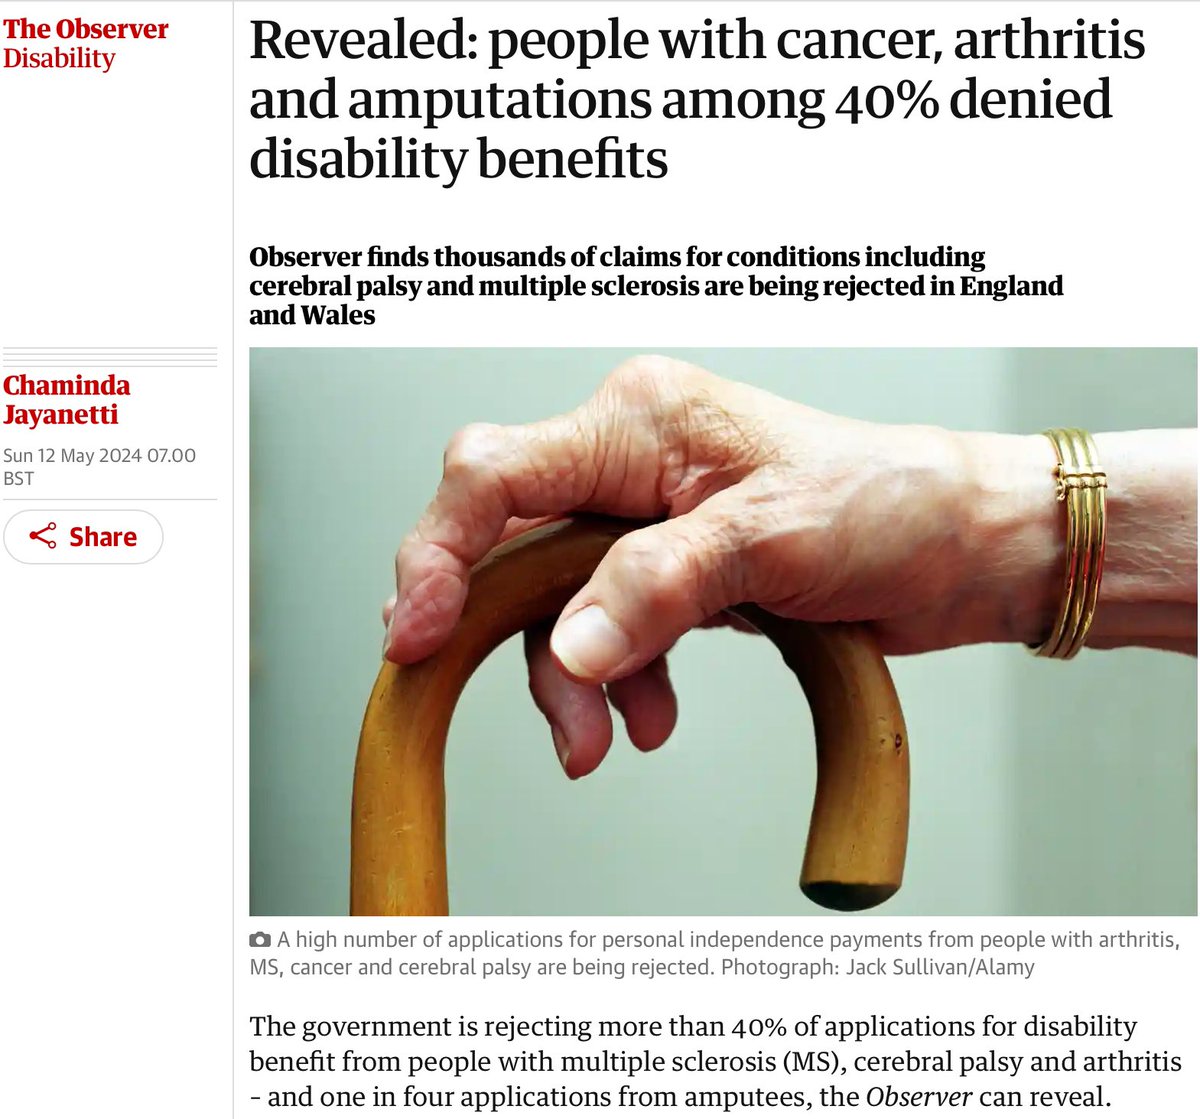 Severely disabled people not disabled enough to get disability benefit, as DWP rejects four in ten applications bit.ly/3QJFXpL the more you try to cope the less chance of qualifying